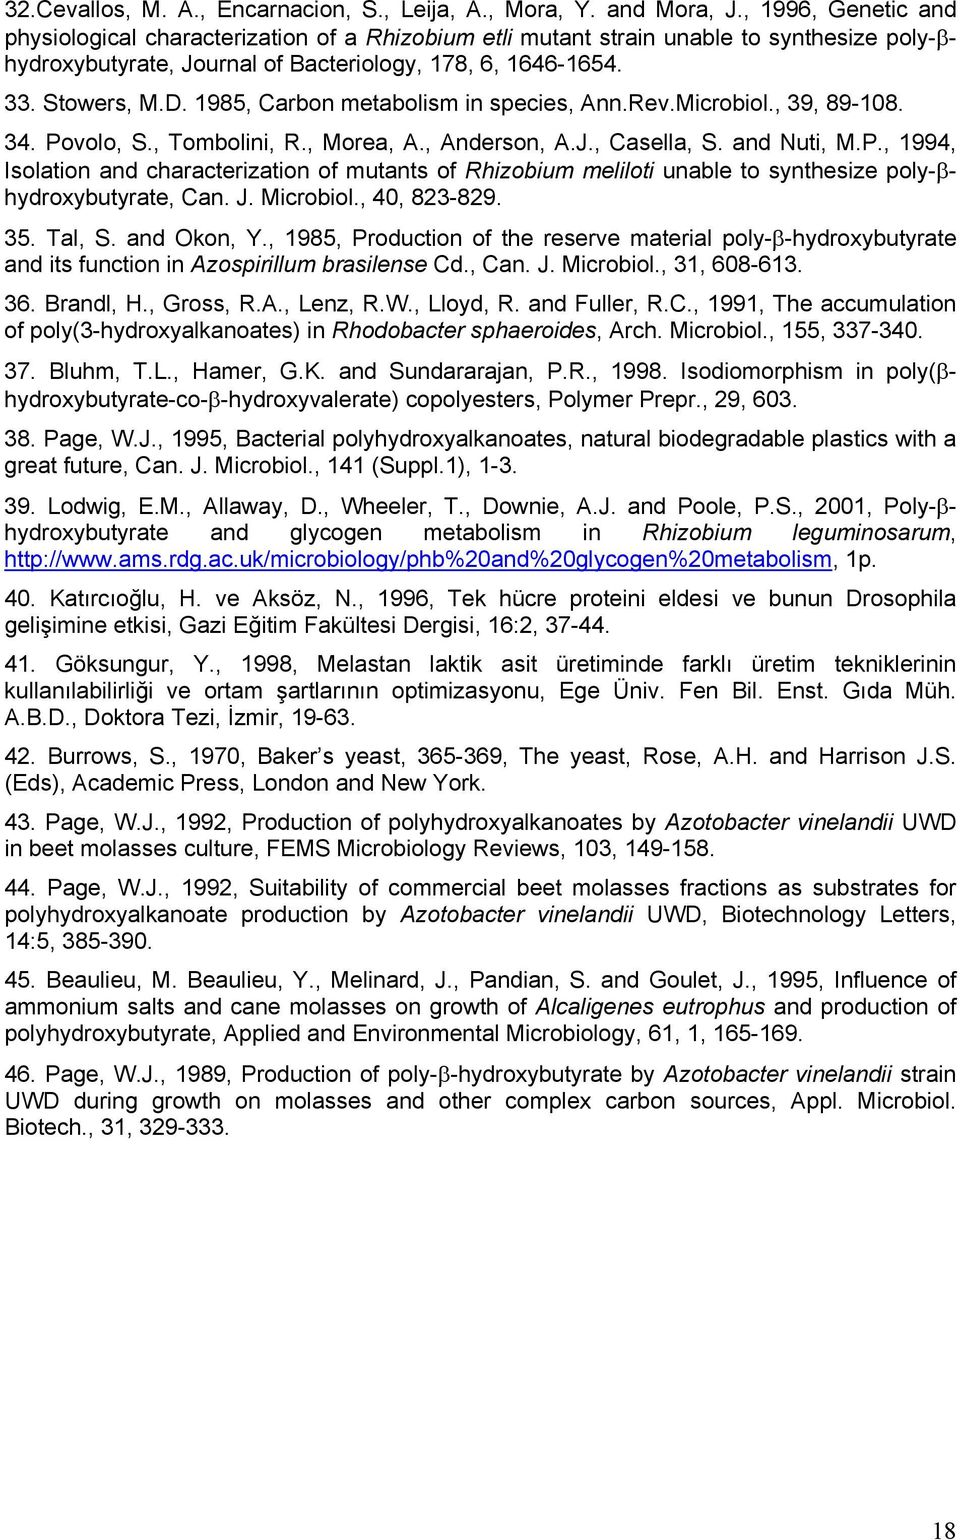 1985, Carbon metabolism in species, Ann.Rev.Microbiol., 39, 89-108. 34. Povolo, S., Tombolini, R., Morea, A., Anderson, A.J., Casella, S. and Nuti, M.P., 1994, Isolation and characterization of mutants of Rhizobium meliloti unable to synthesize poly-βhydroxybutyrate, Can.